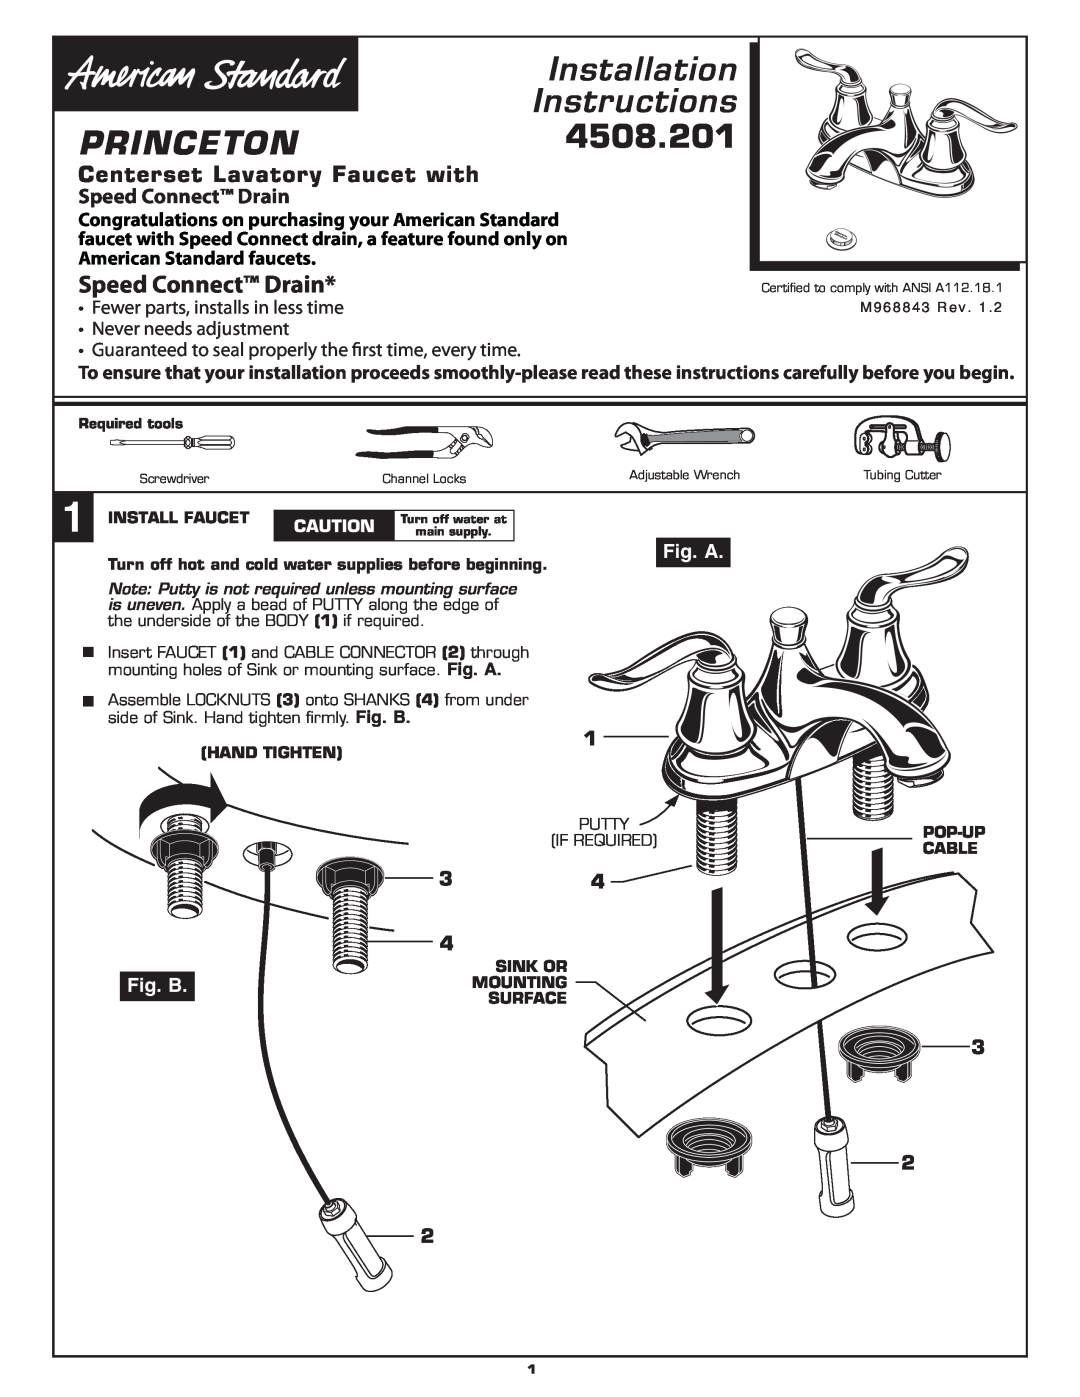 American Standard 4508.201 installation instructions Princeton, Speed Connect Drain, Centerset Lavatory Faucet with 